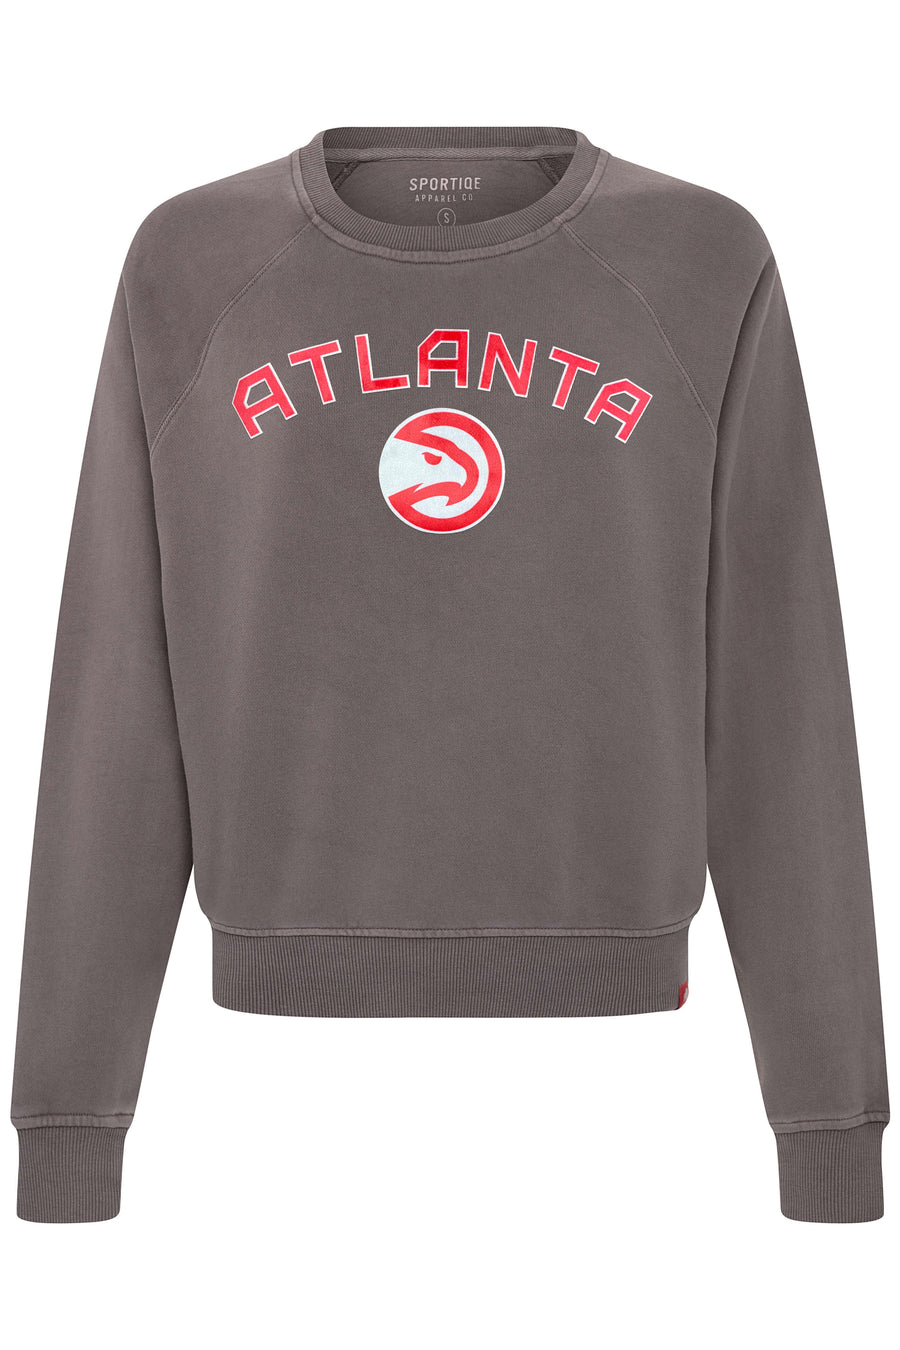 AJ Griffin shirt, hoodie, sweater, long sleeve and tank top